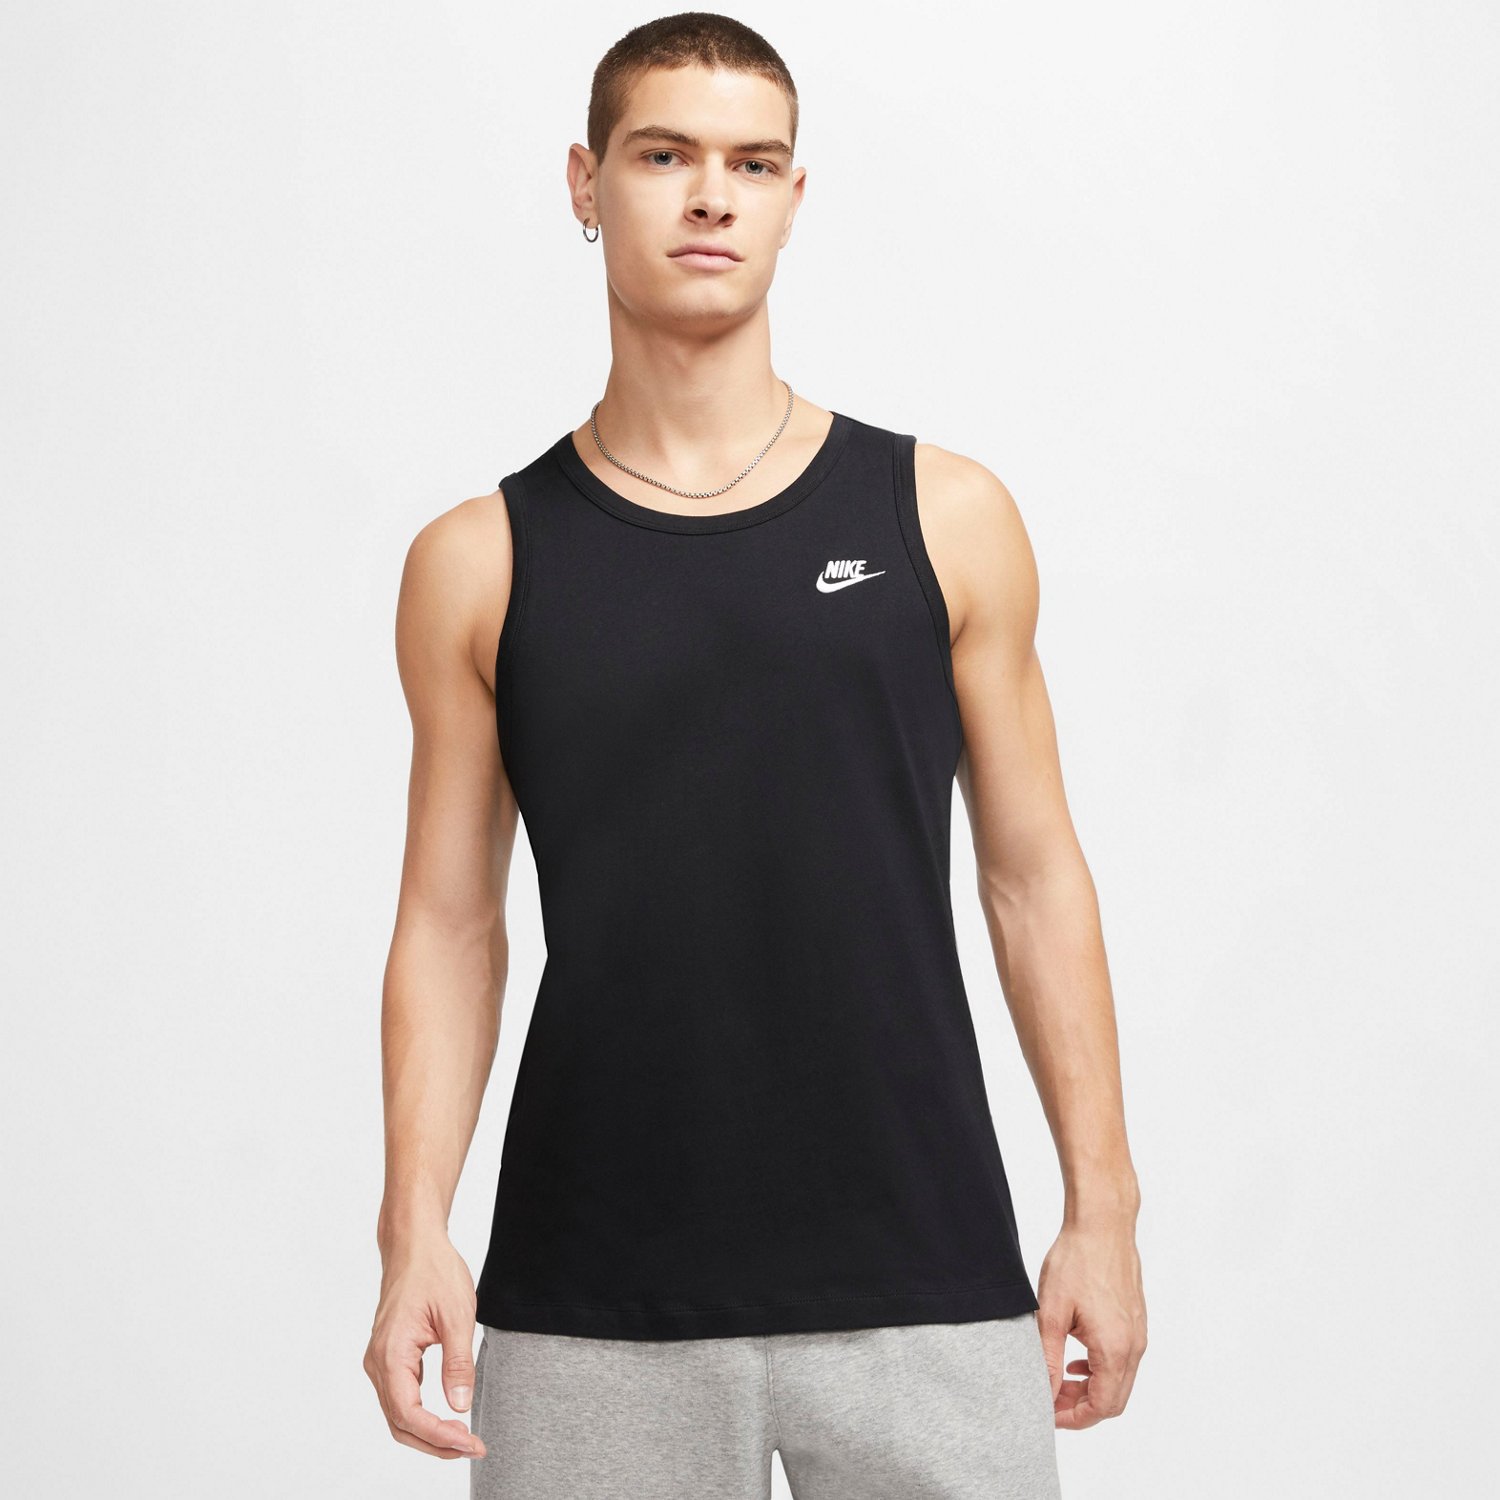 Under Armour Men's Sportstyle Left Chest Cut-off Sleeveless Top